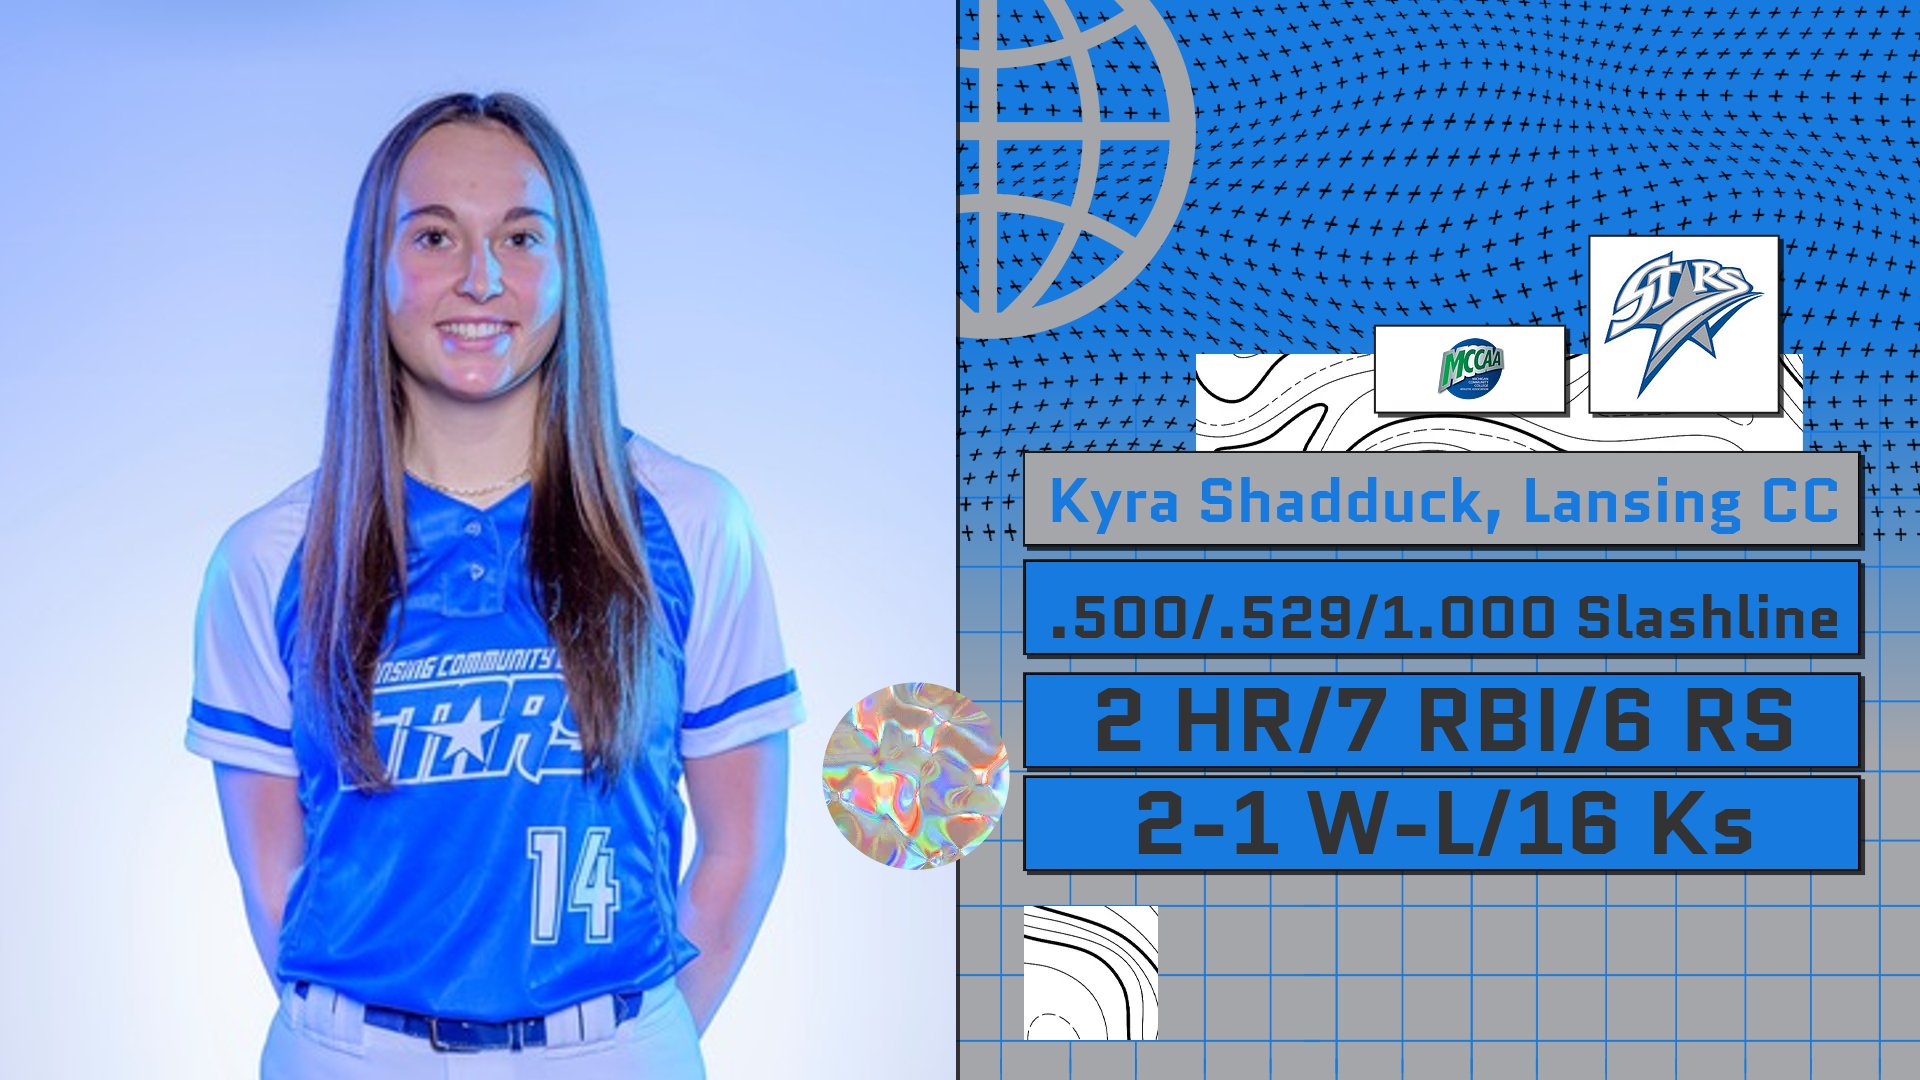 Stars' Shadduck Earns MCCAA Western Conference Softball Player of the Week5